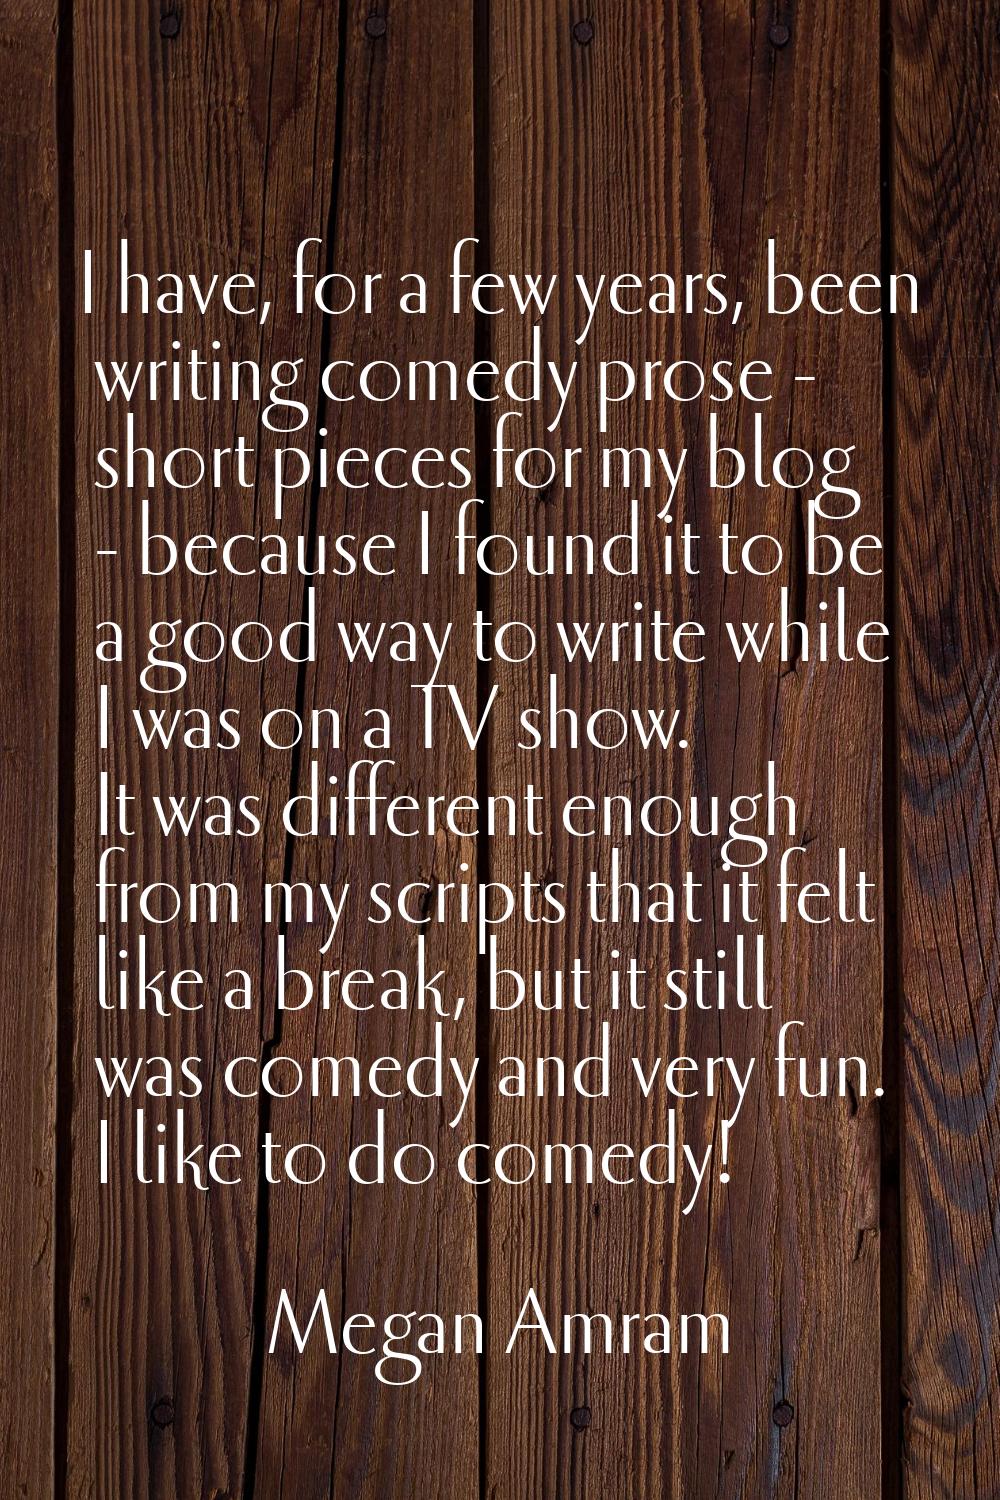 I have, for a few years, been writing comedy prose - short pieces for my blog - because I found it 